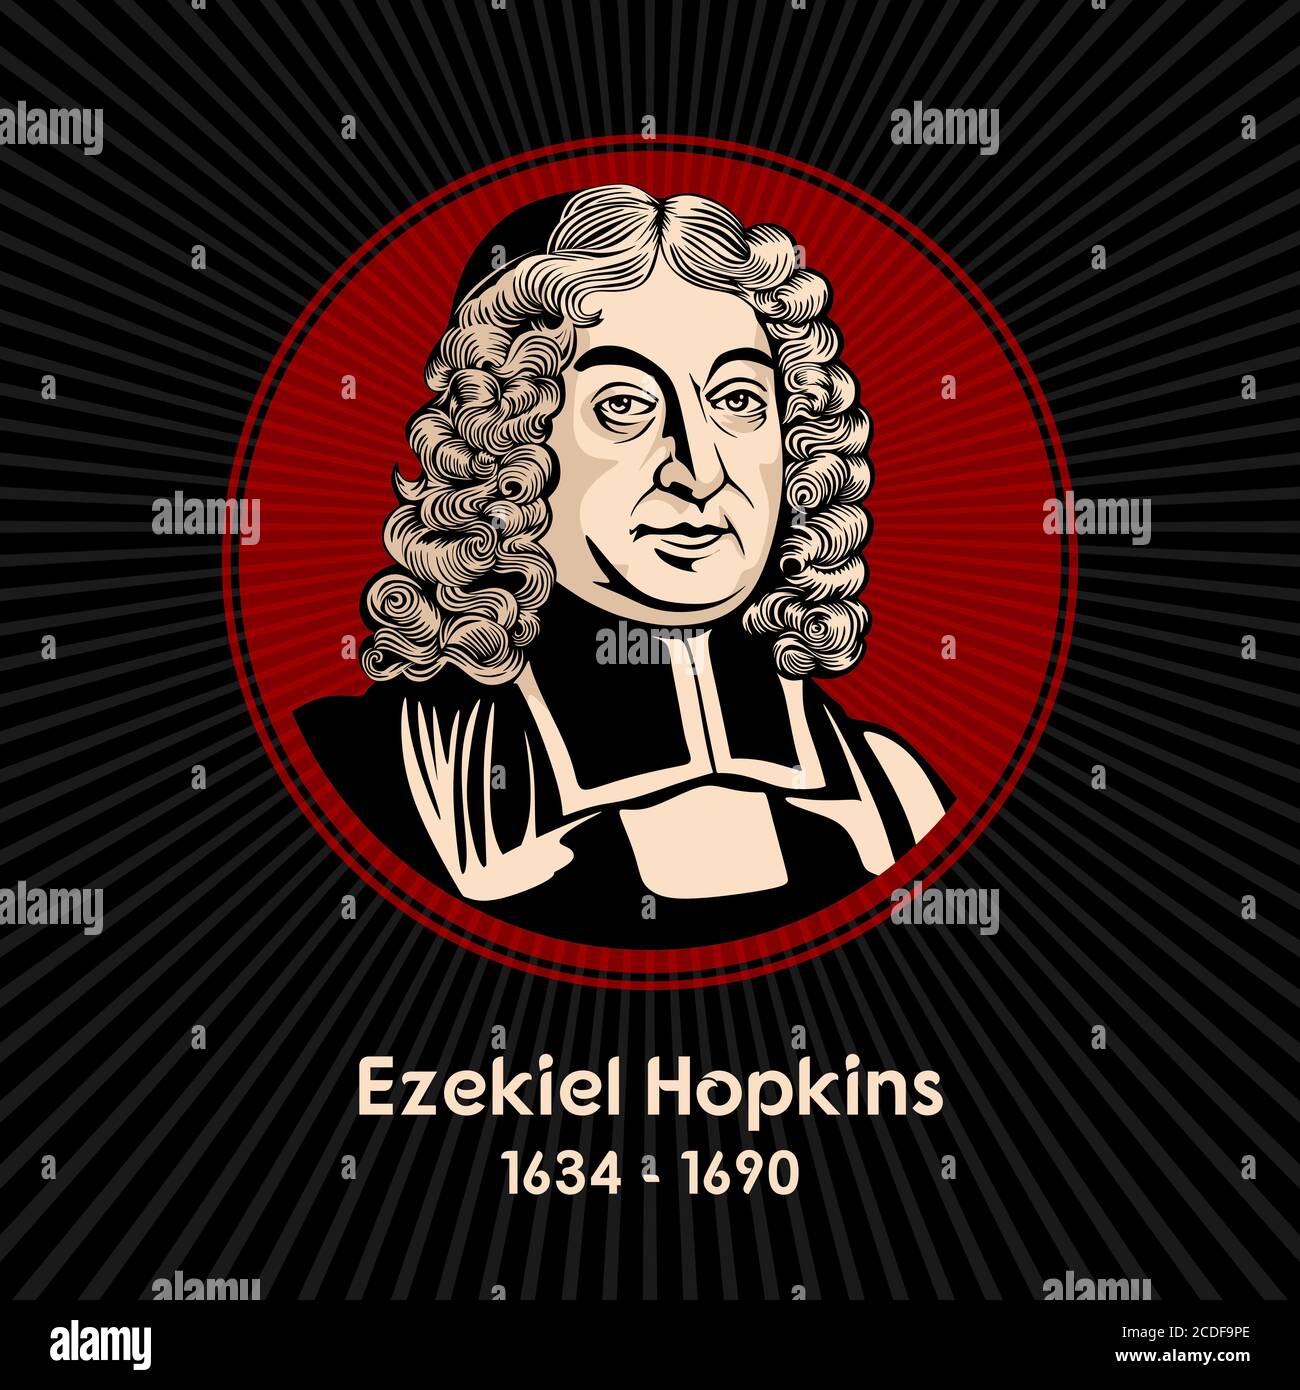 Ezekiel Hopkins (1634 - 1690) was an Anglican divine in the Church of Ireland, who was Bishop of Derry from 1681 to 1690. Stock Vector